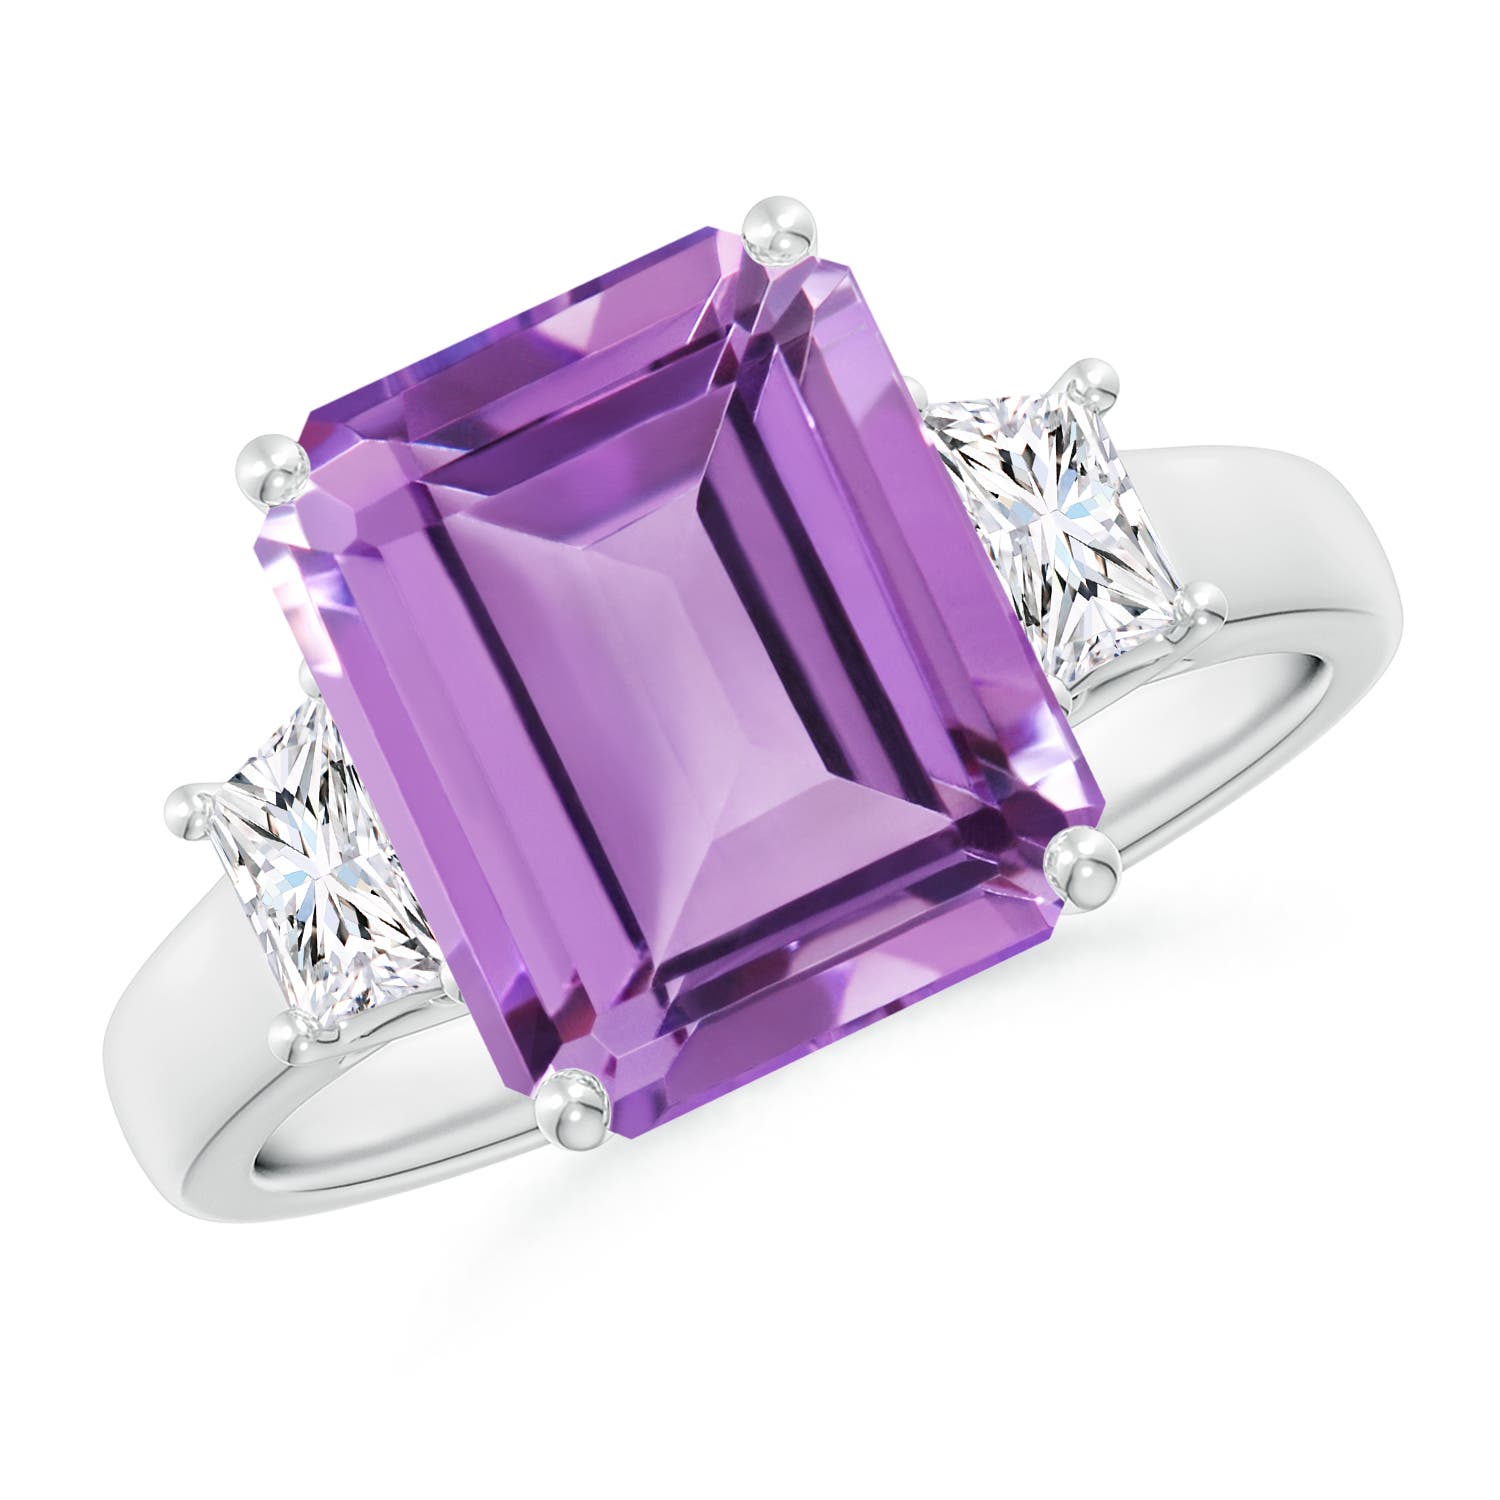 A- Amethyst / 4.32 CT / 14 KT White Gold